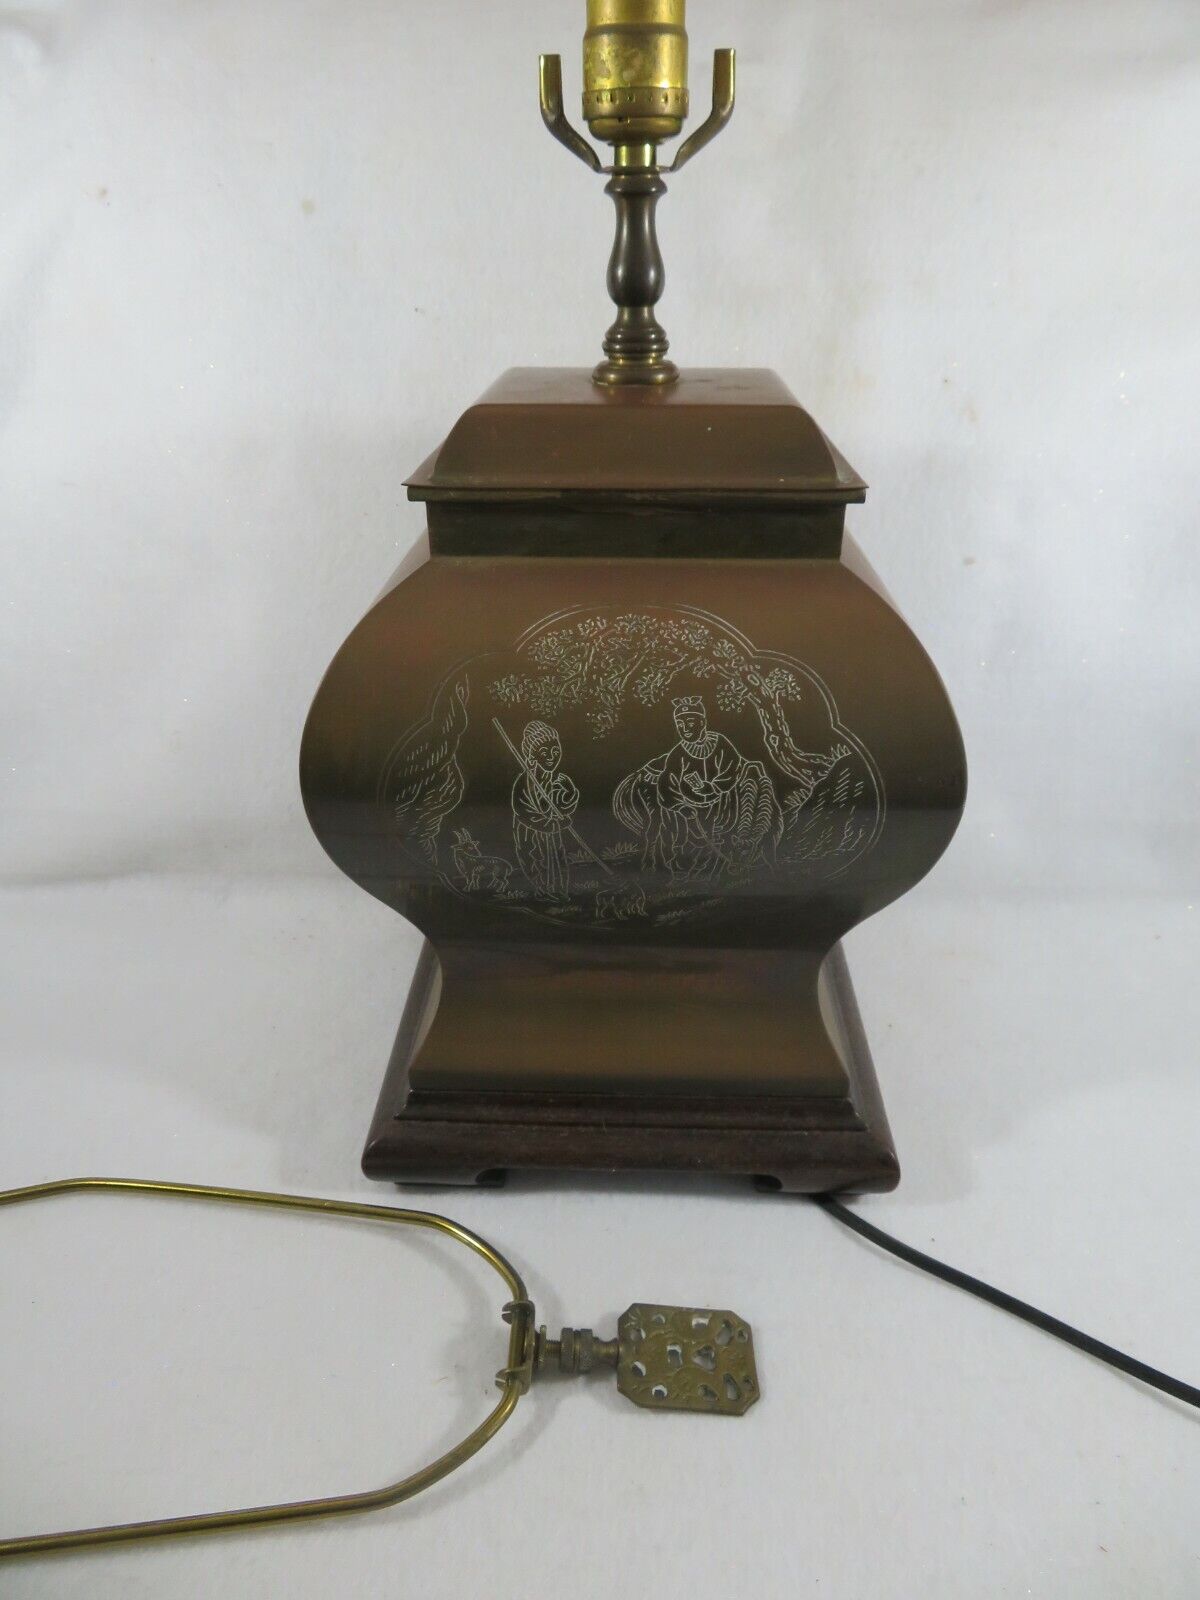 Asian Design Etched Brass Lamp with Great Patina and Interesting Scenes